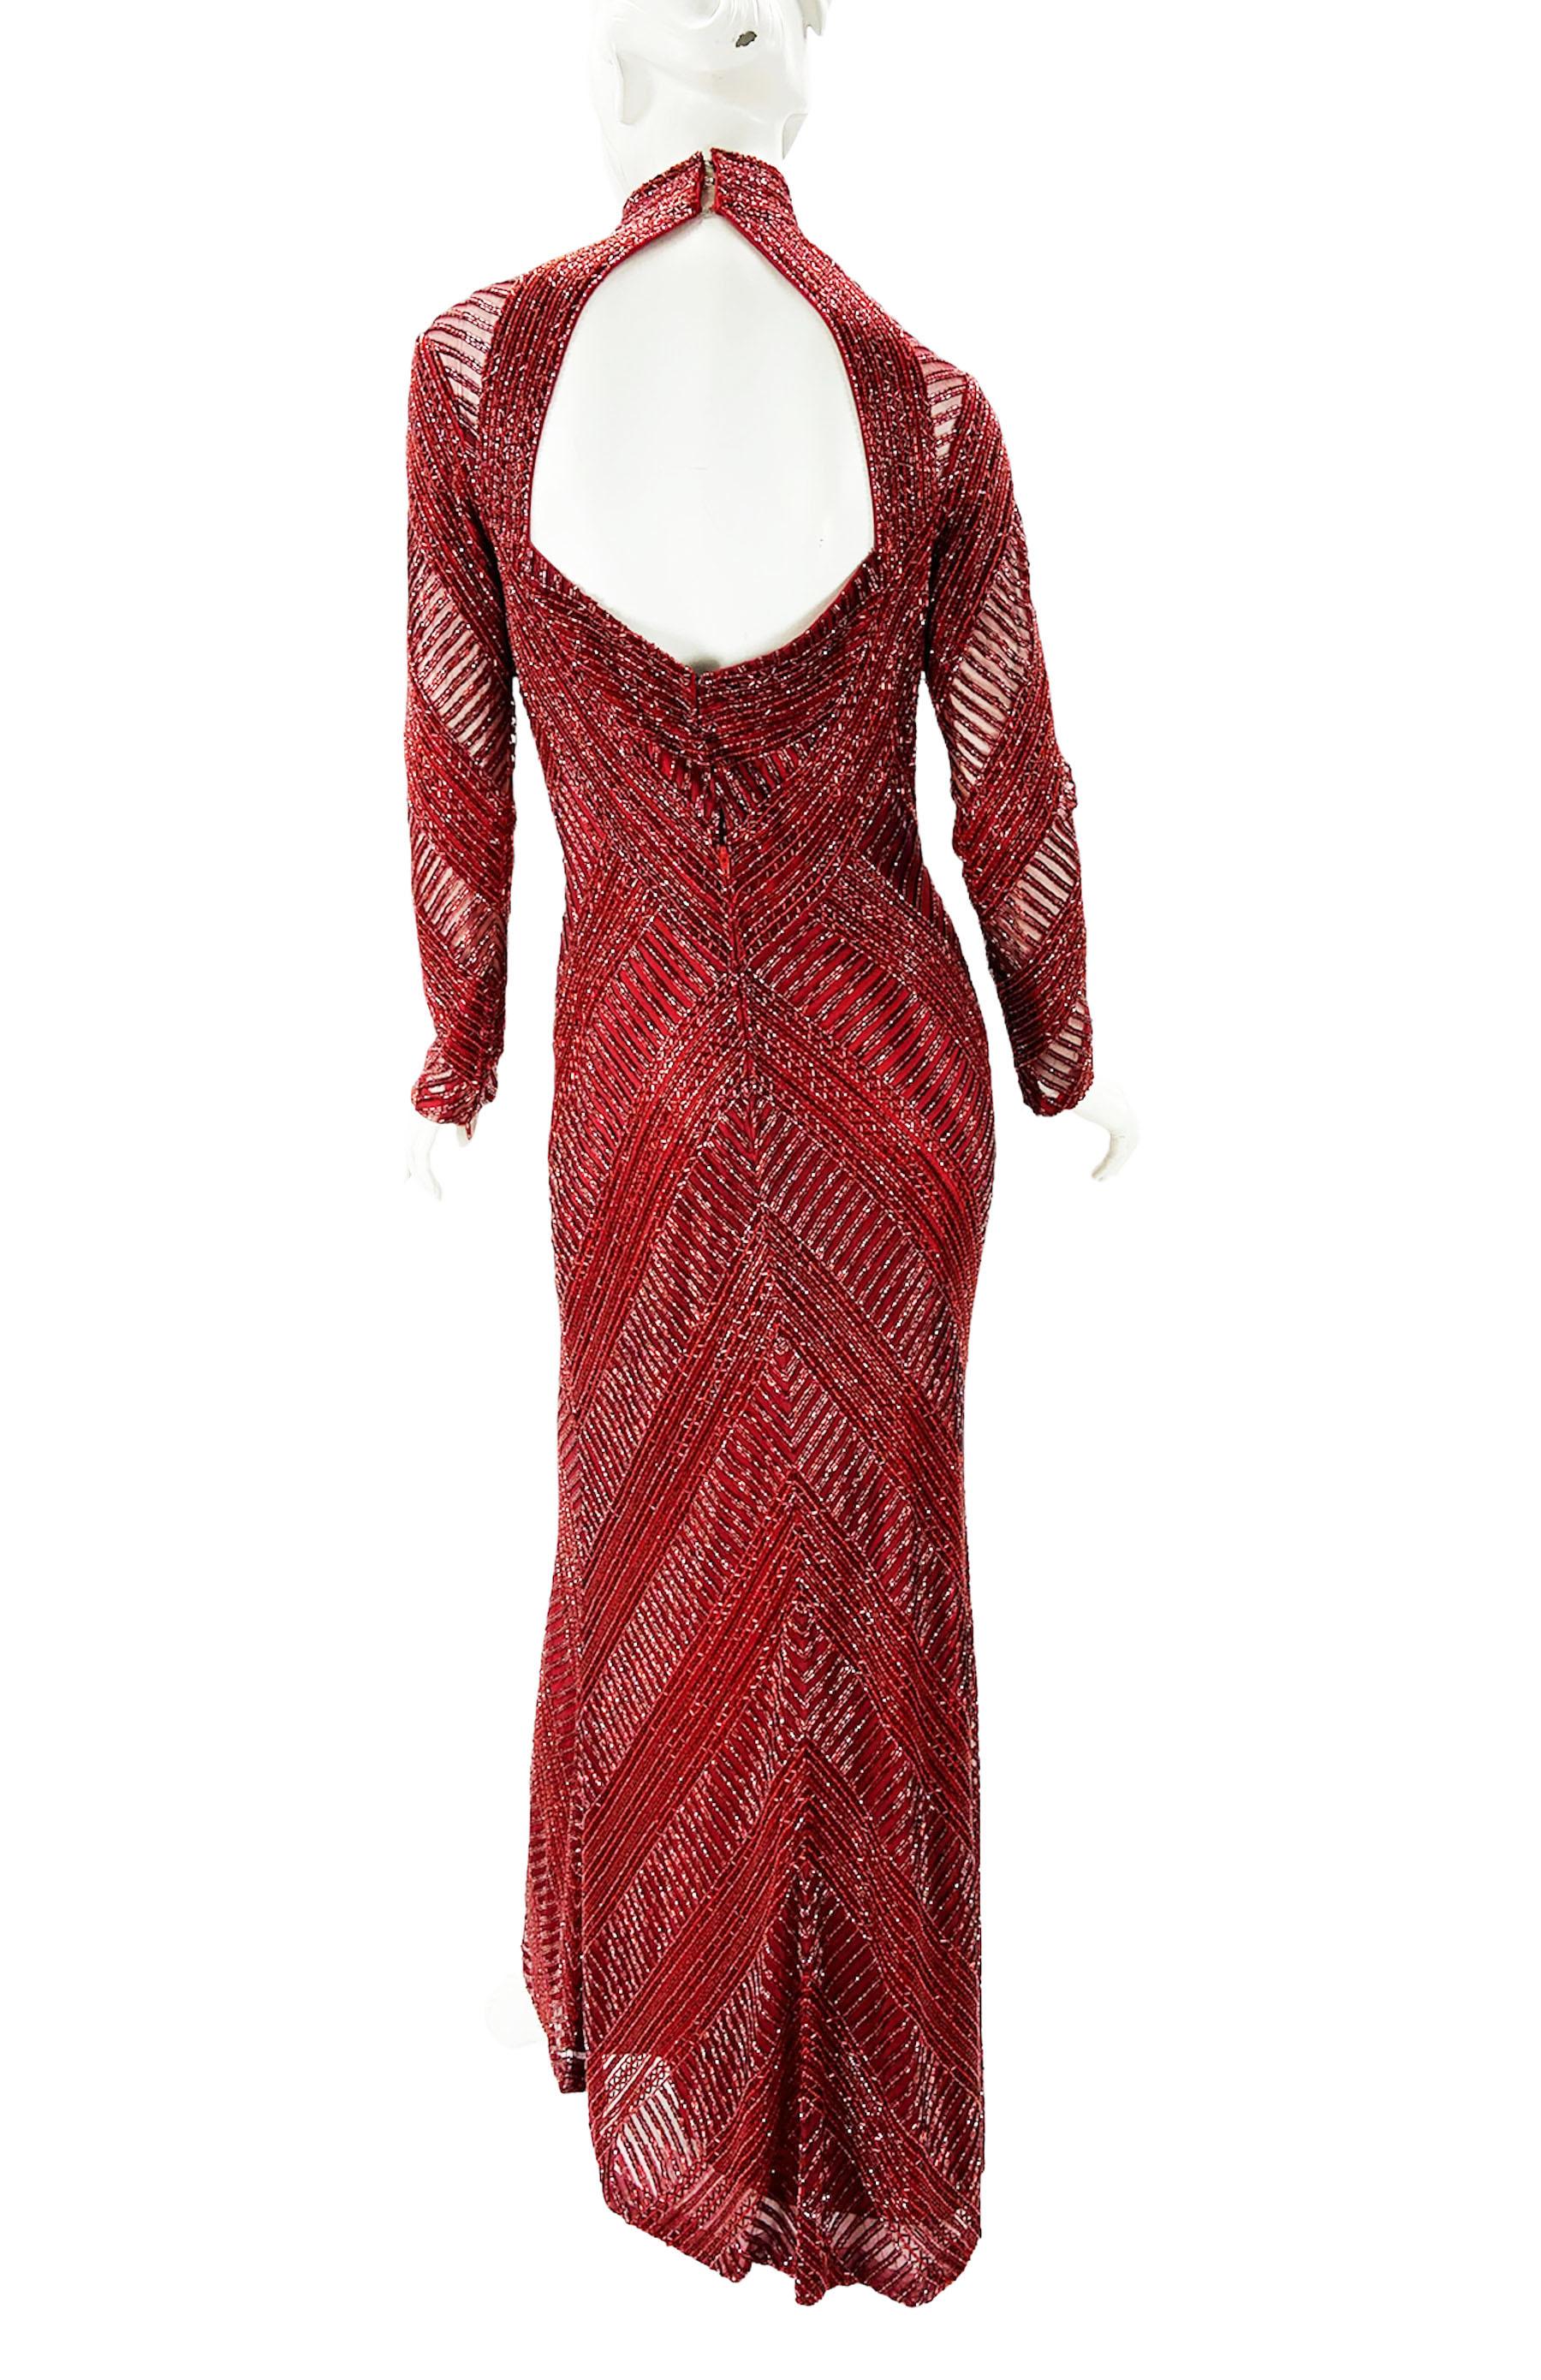 Vintage 80's Bob Mackie Burgundy Fully Beaded Open Back Evening Dress Gown M In Excellent Condition For Sale In Montgomery, TX